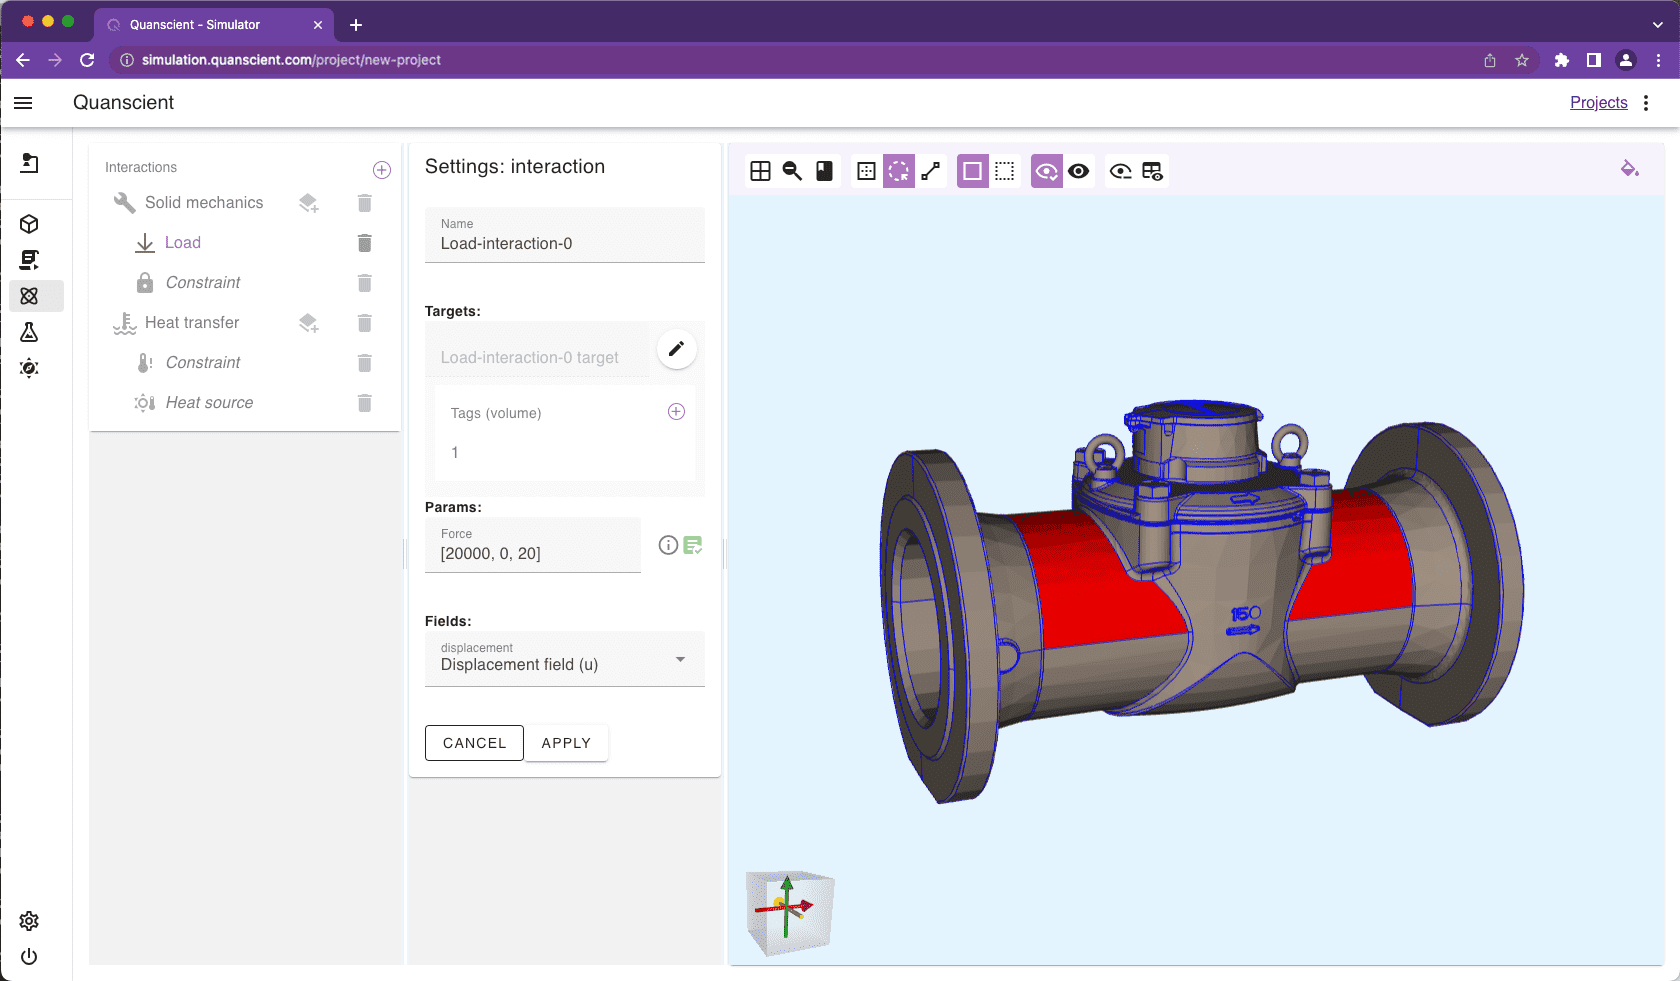 Demo picture of the Quanscient.allsolve GUI with a piece of a pipe